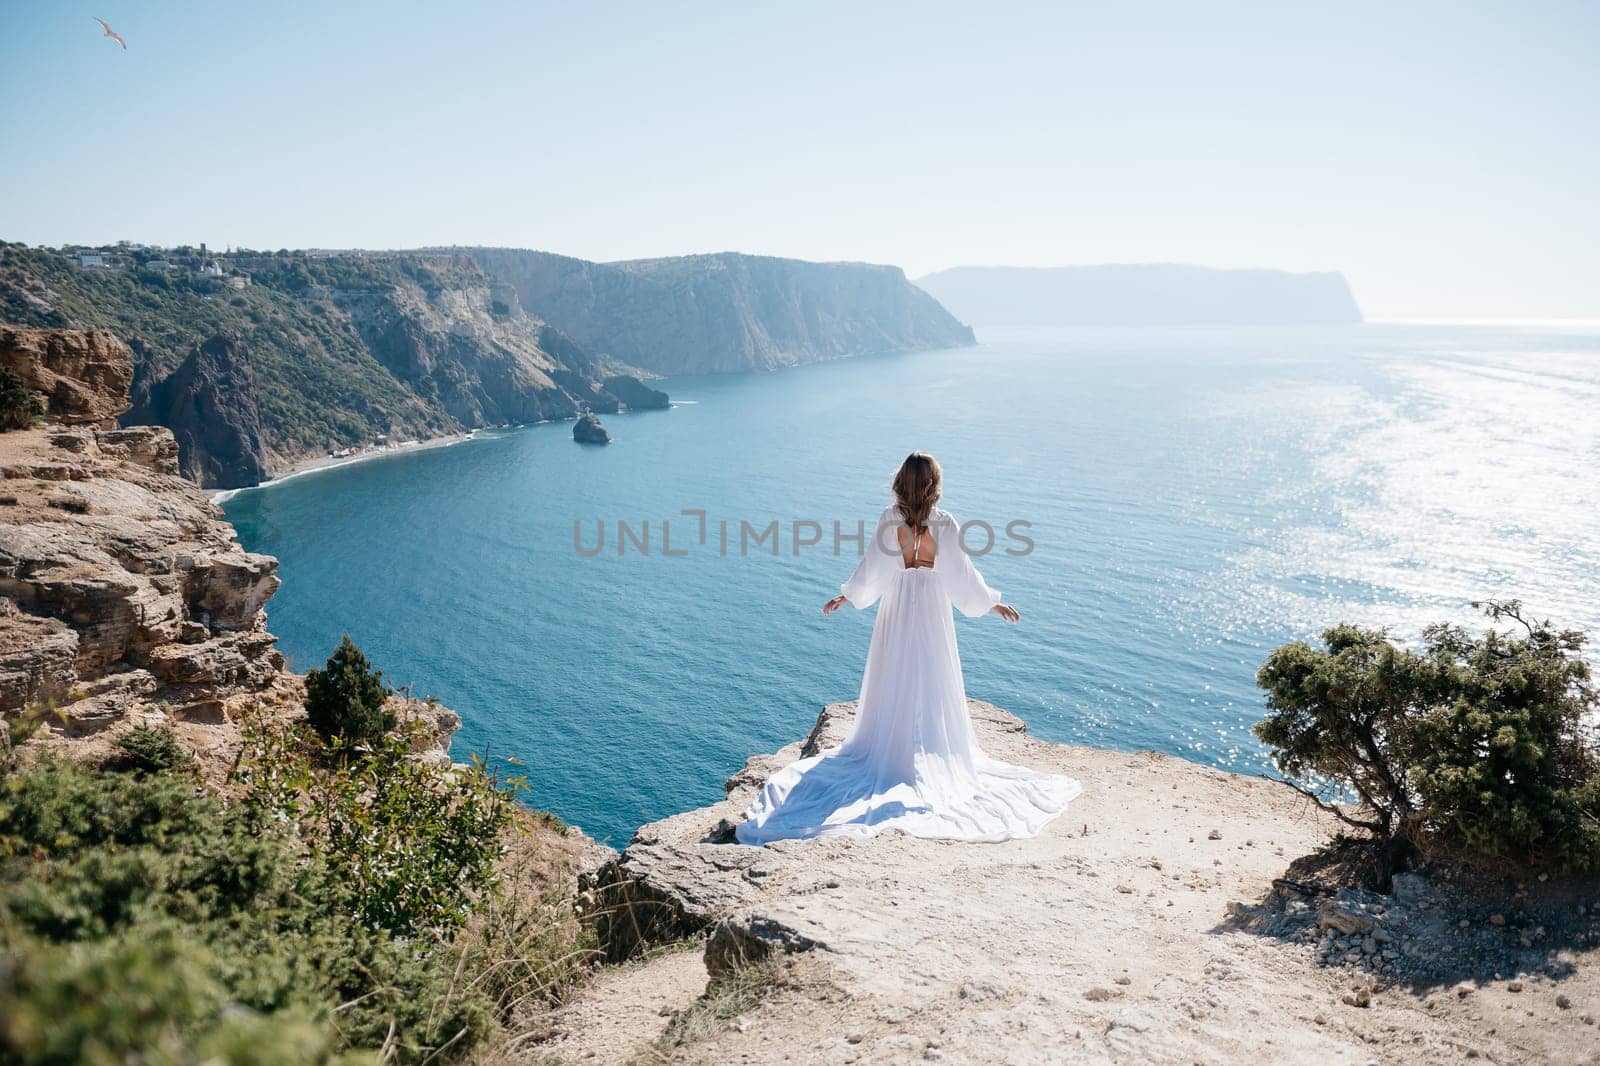 woman stands cliff overlooking the ocean. The sky is clear and the water is calm. The woman is enjoying the view and taking in the beauty of the scene. by Matiunina